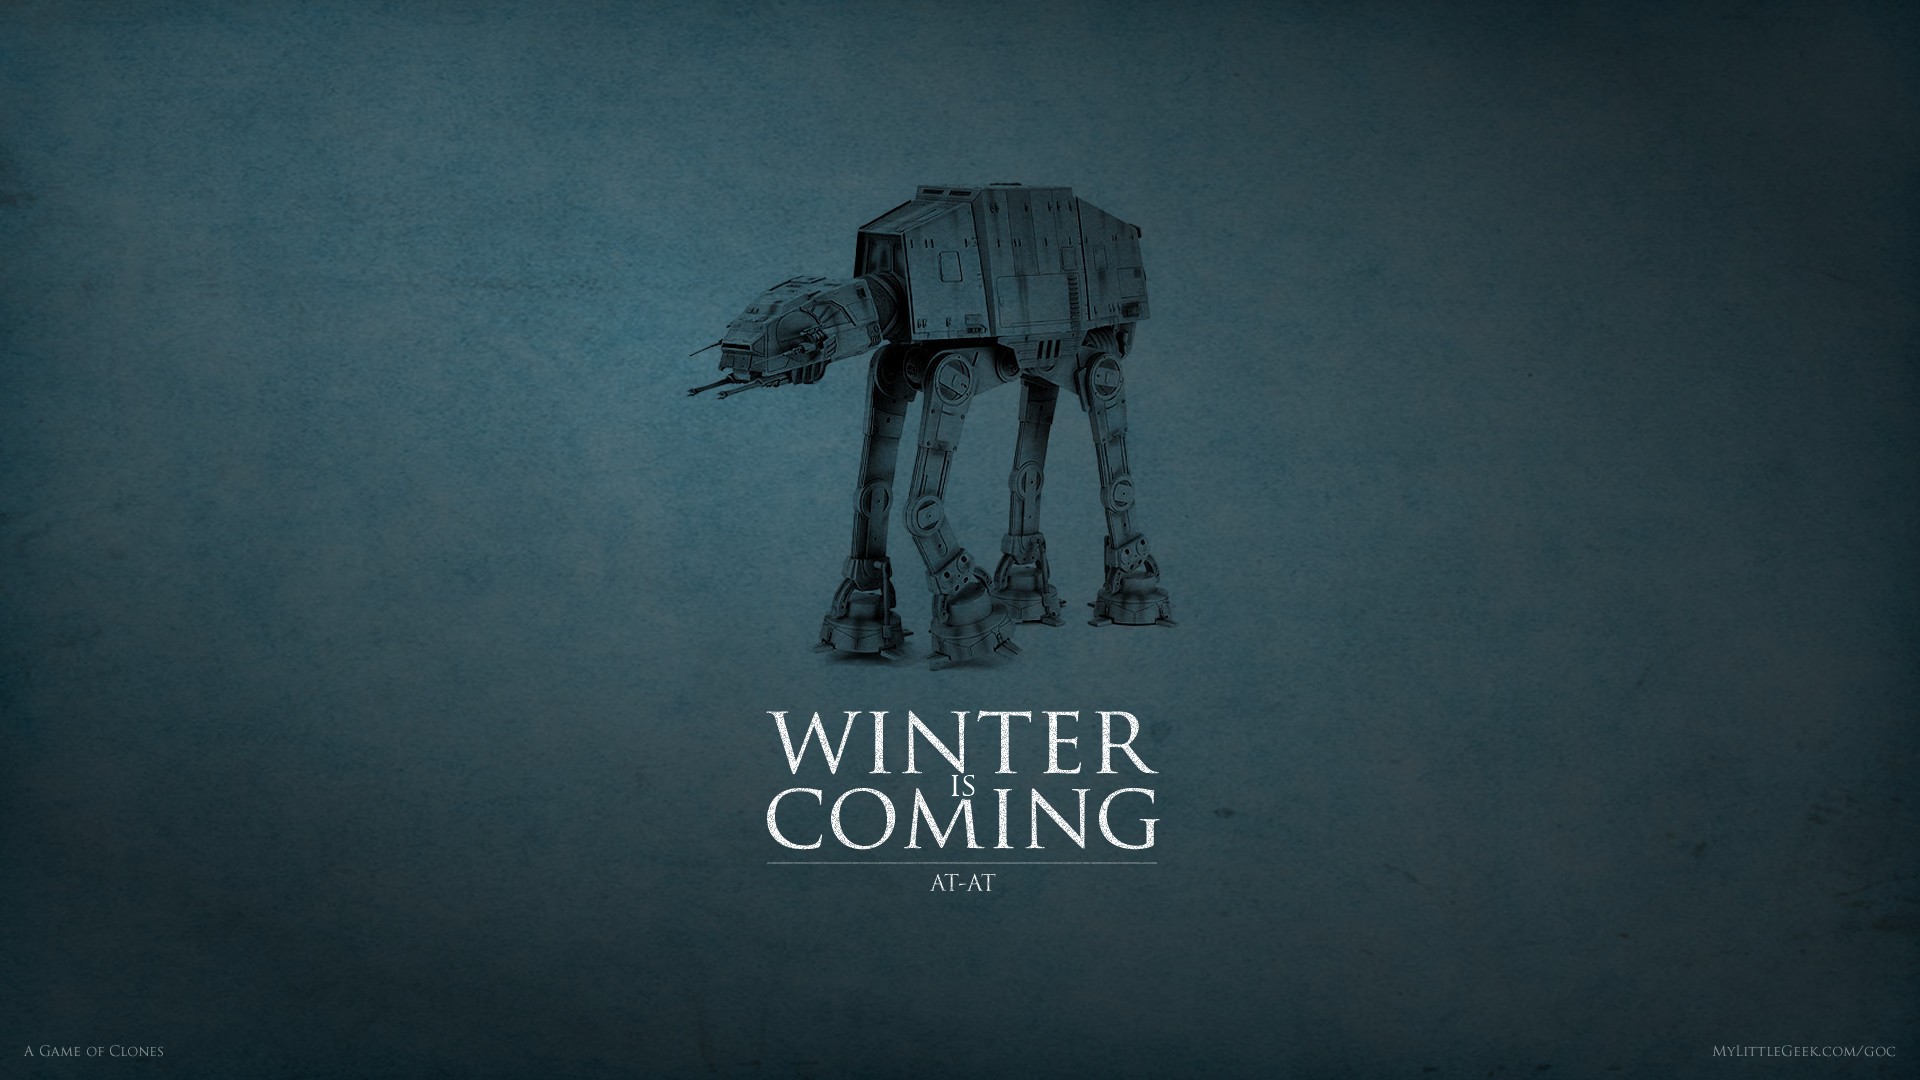 Game Of Thrones House Stark Star Wars AT AT Star Wars AT AT Game Of Thrones Crossover Winter Is Comi 1920x1080